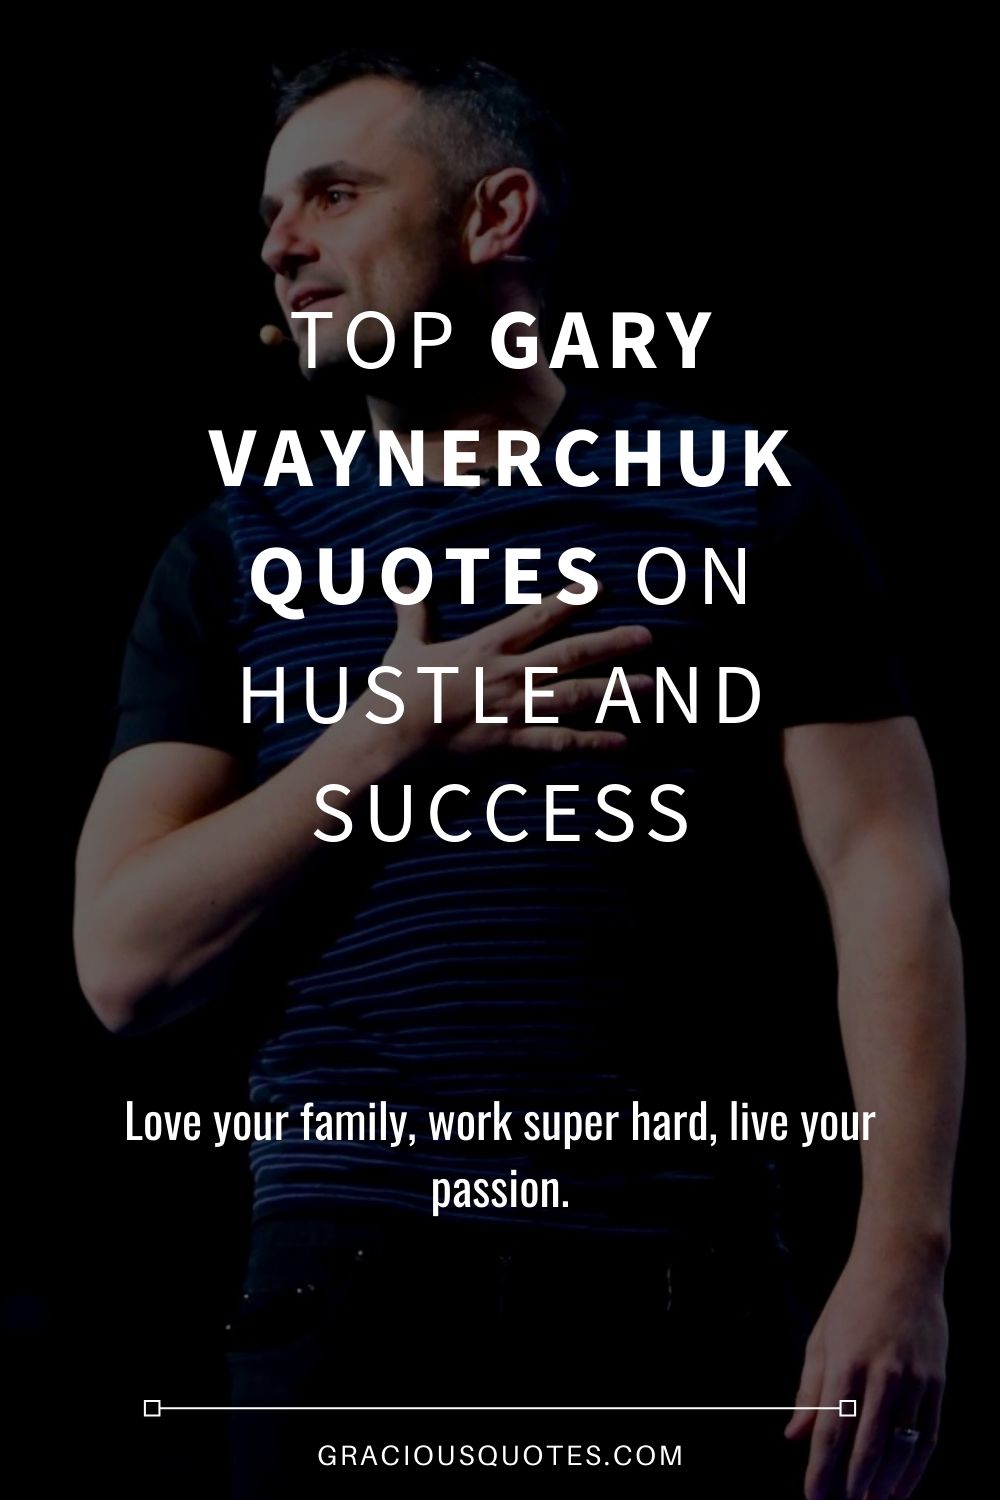 top-Gary-Vaynerchuk-Quotes-on-Hustle-and-Success - Gracious Quotes